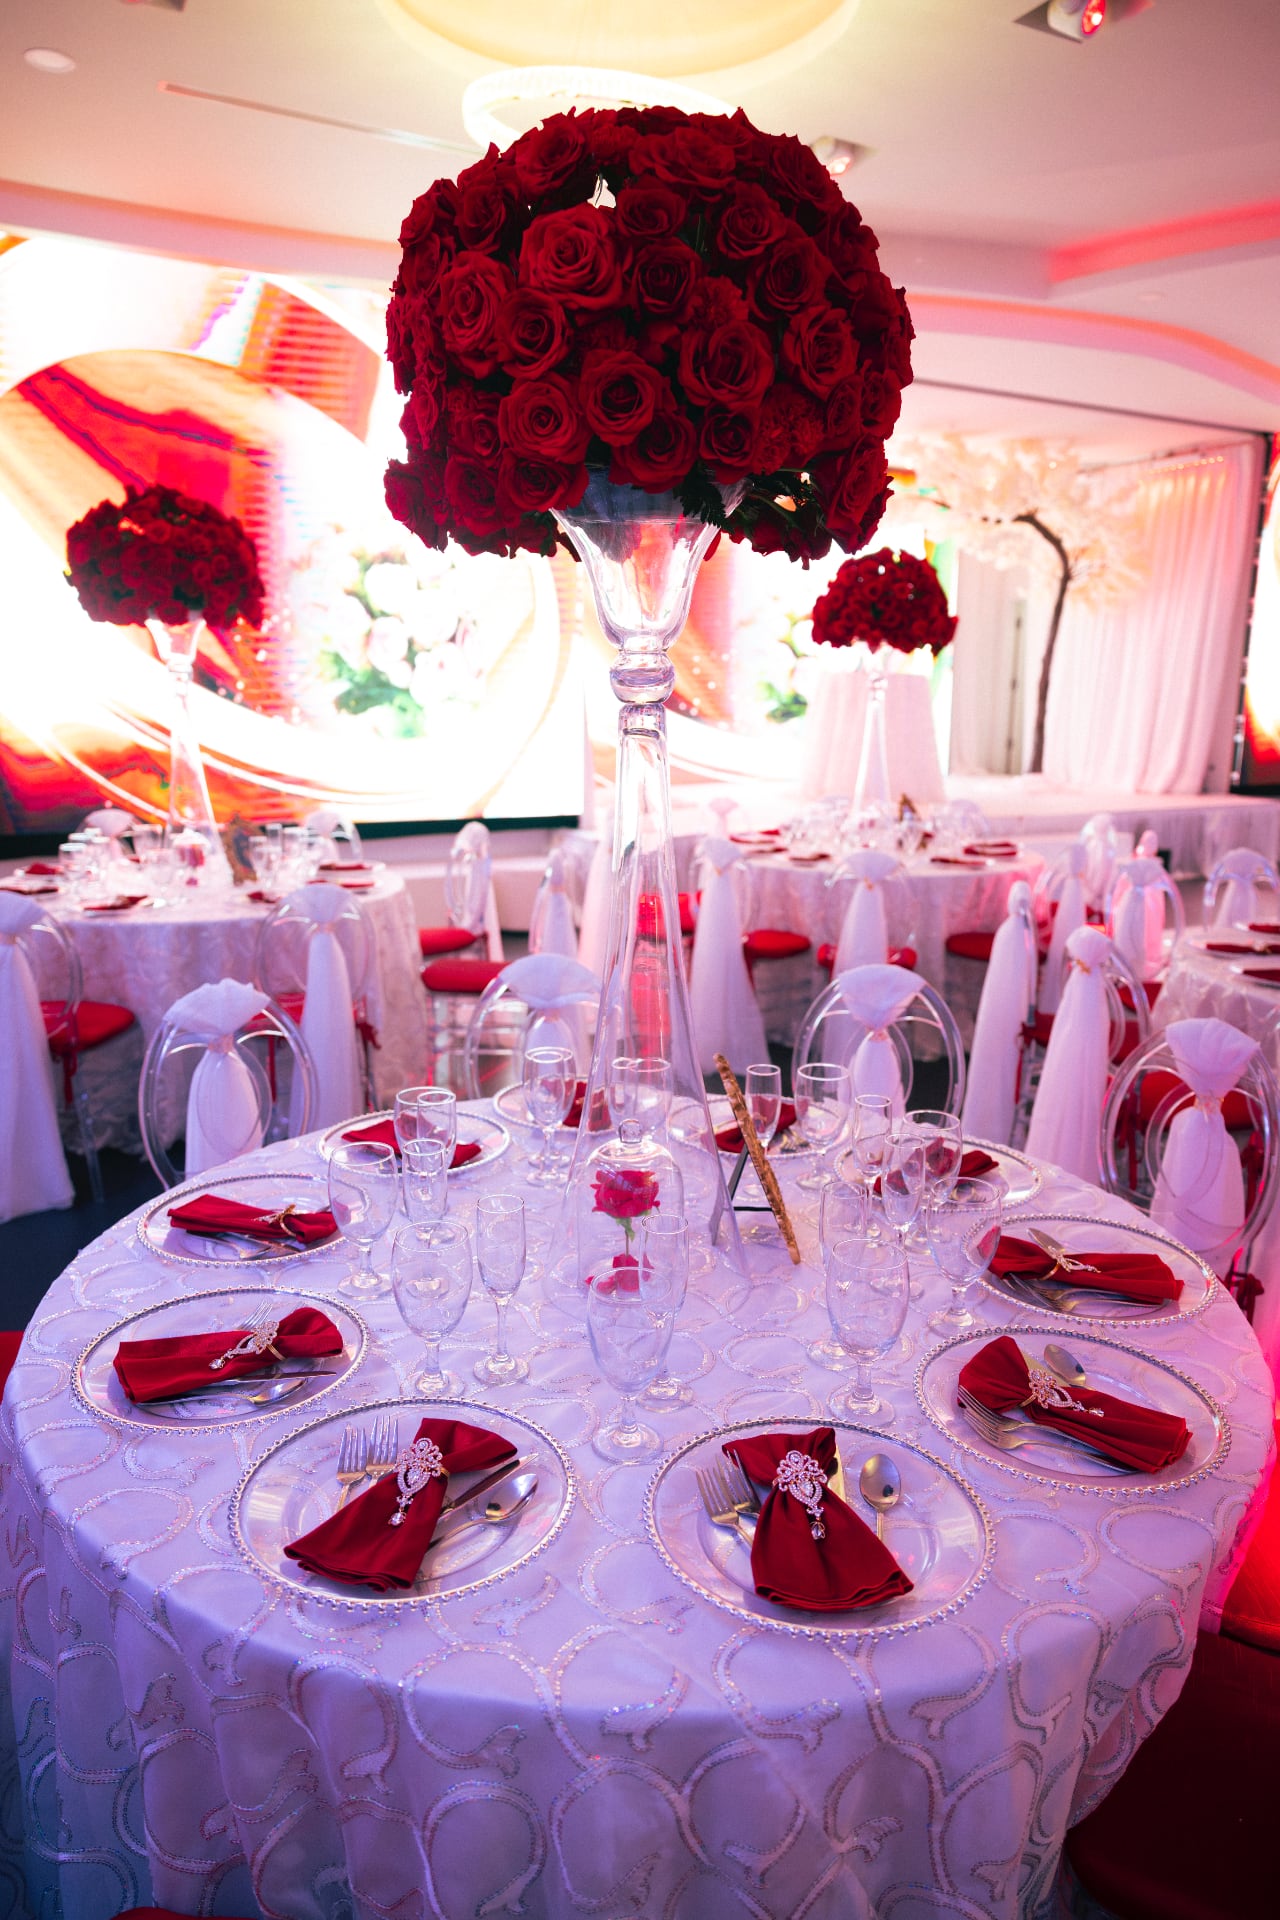 Red Roses - Onyx Luxury Banquet Hall